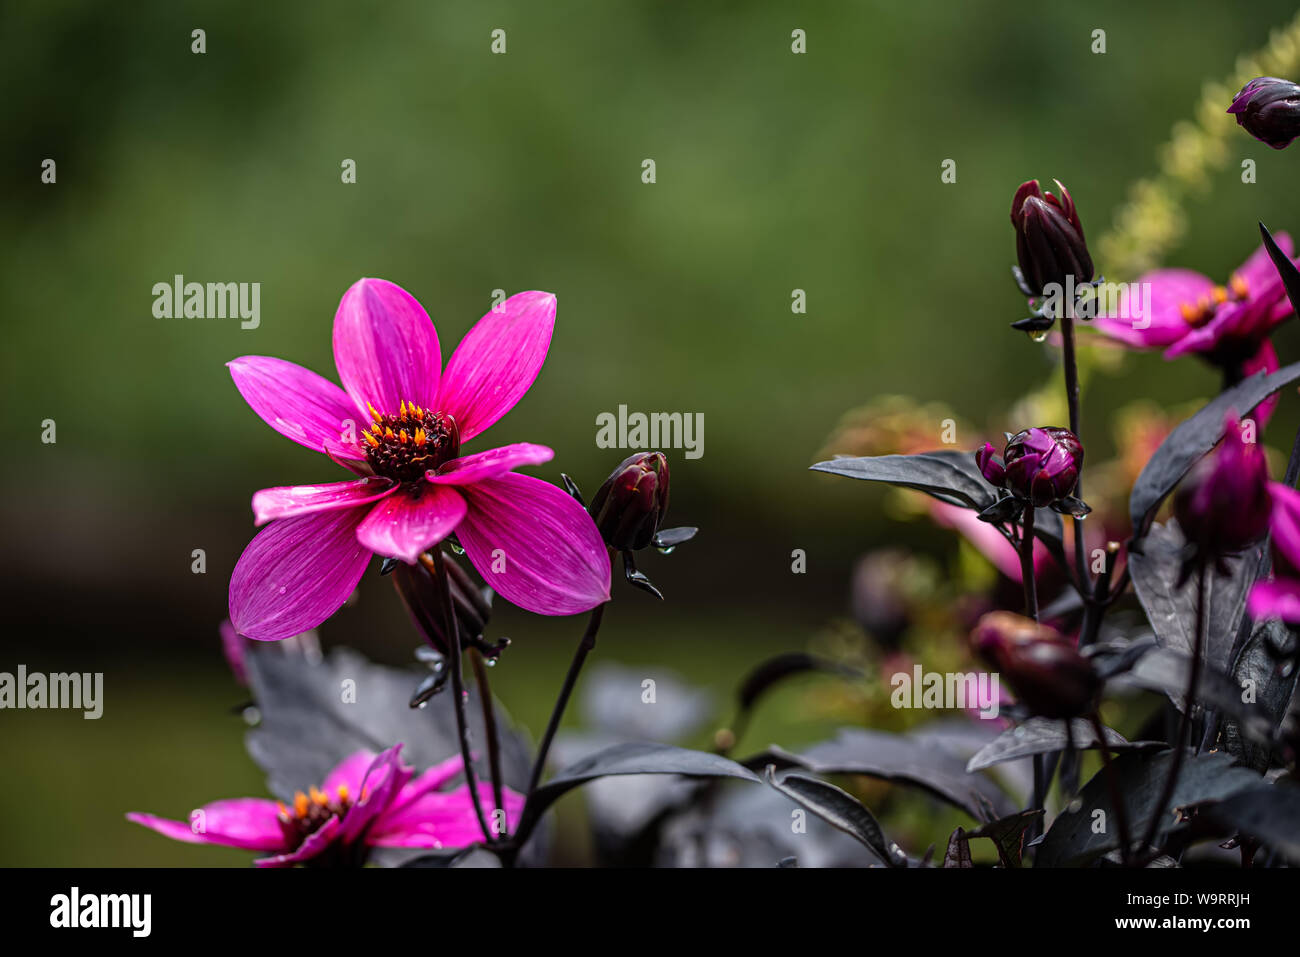 Three pink anemone flowers close up. Garden of thimbleweed or windflower Stock Photo